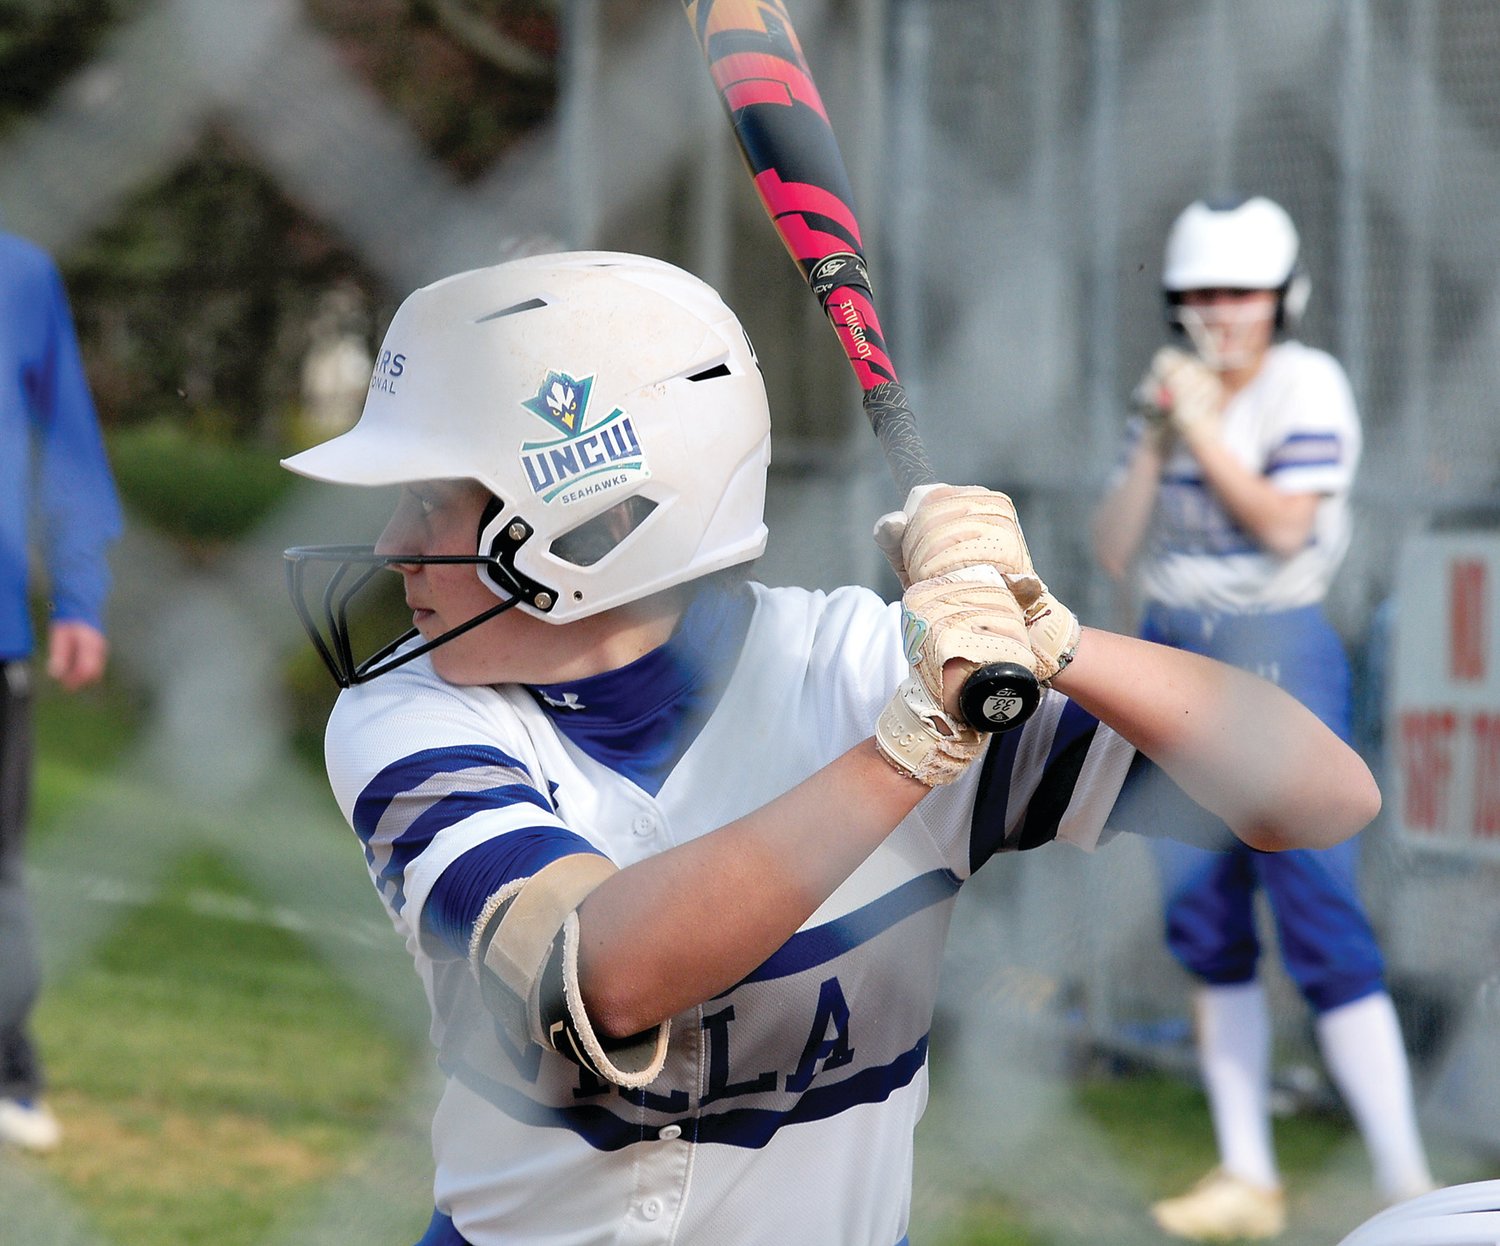 Villa Joseph Marie senior Ava Tsiouplis crushed a pair of doubles and drove in a run in last-inning loss to Council Rock North.